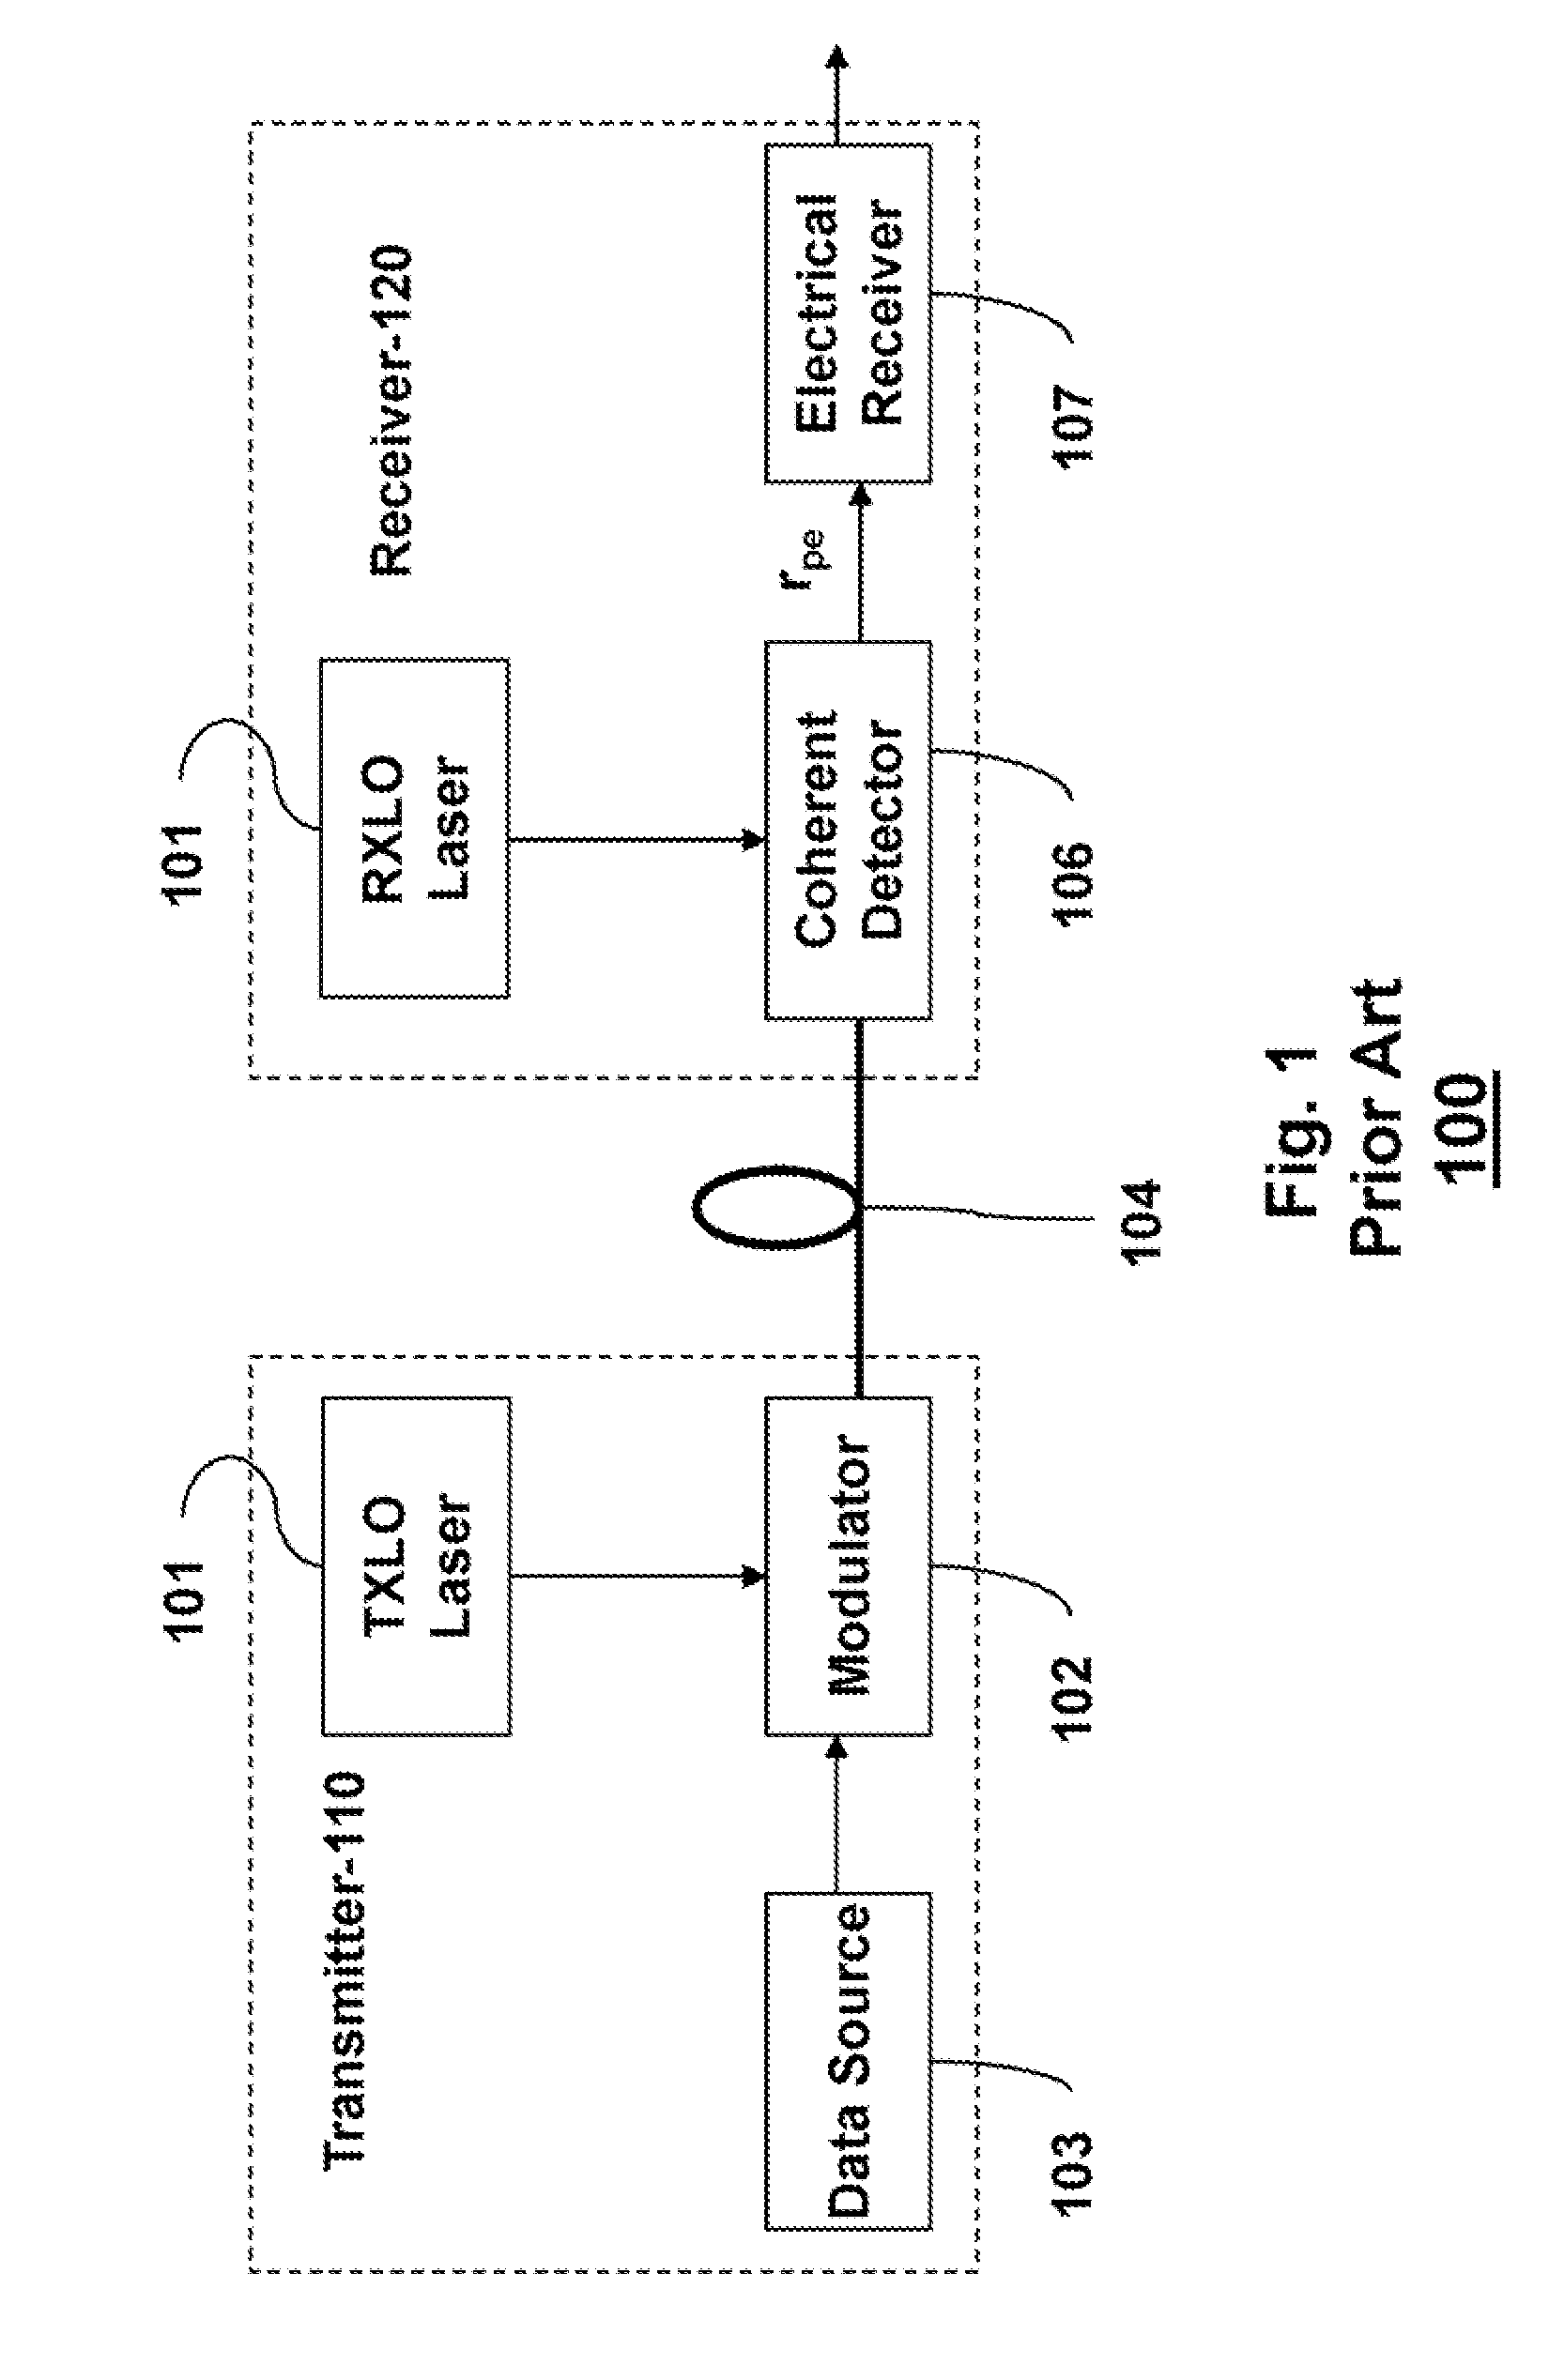 Method and System for Equalization and Decoding Received Signals Based on High-Order Statistics in Optical Communication Networks